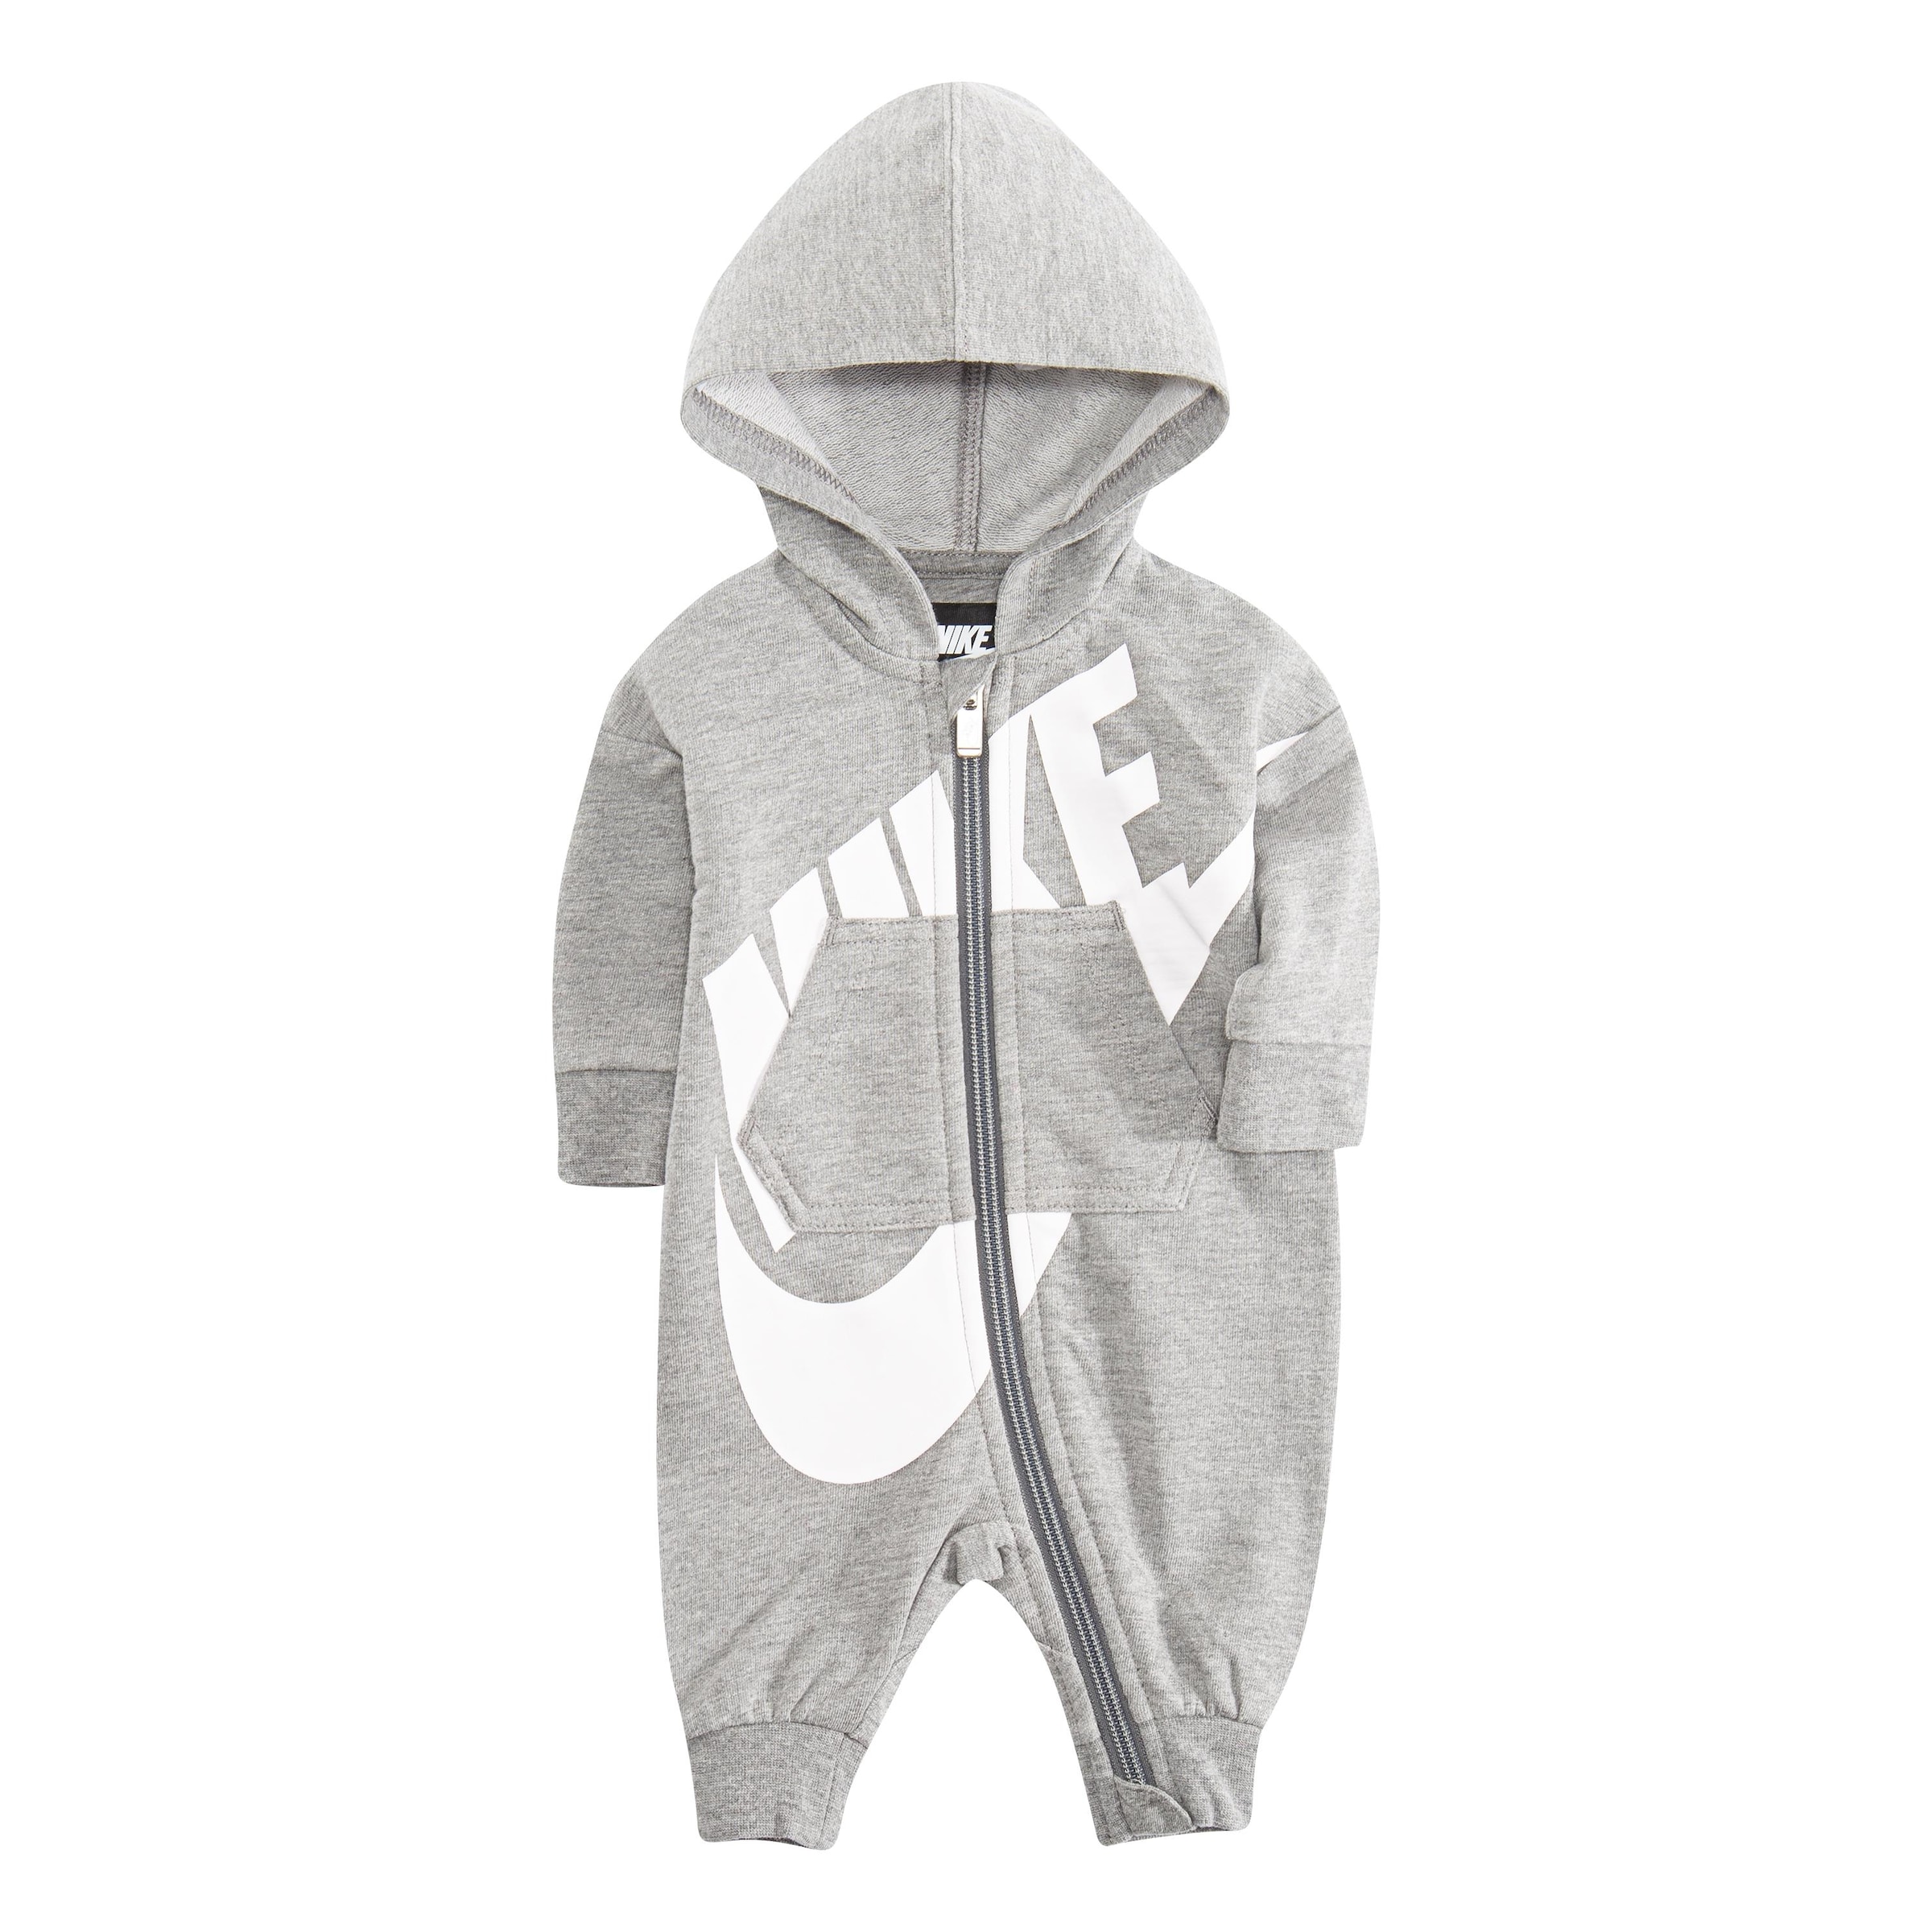 »NKN ALL Sportswear COVERALL« bei PLAY online OTTO Nike Jumpsuit DAY